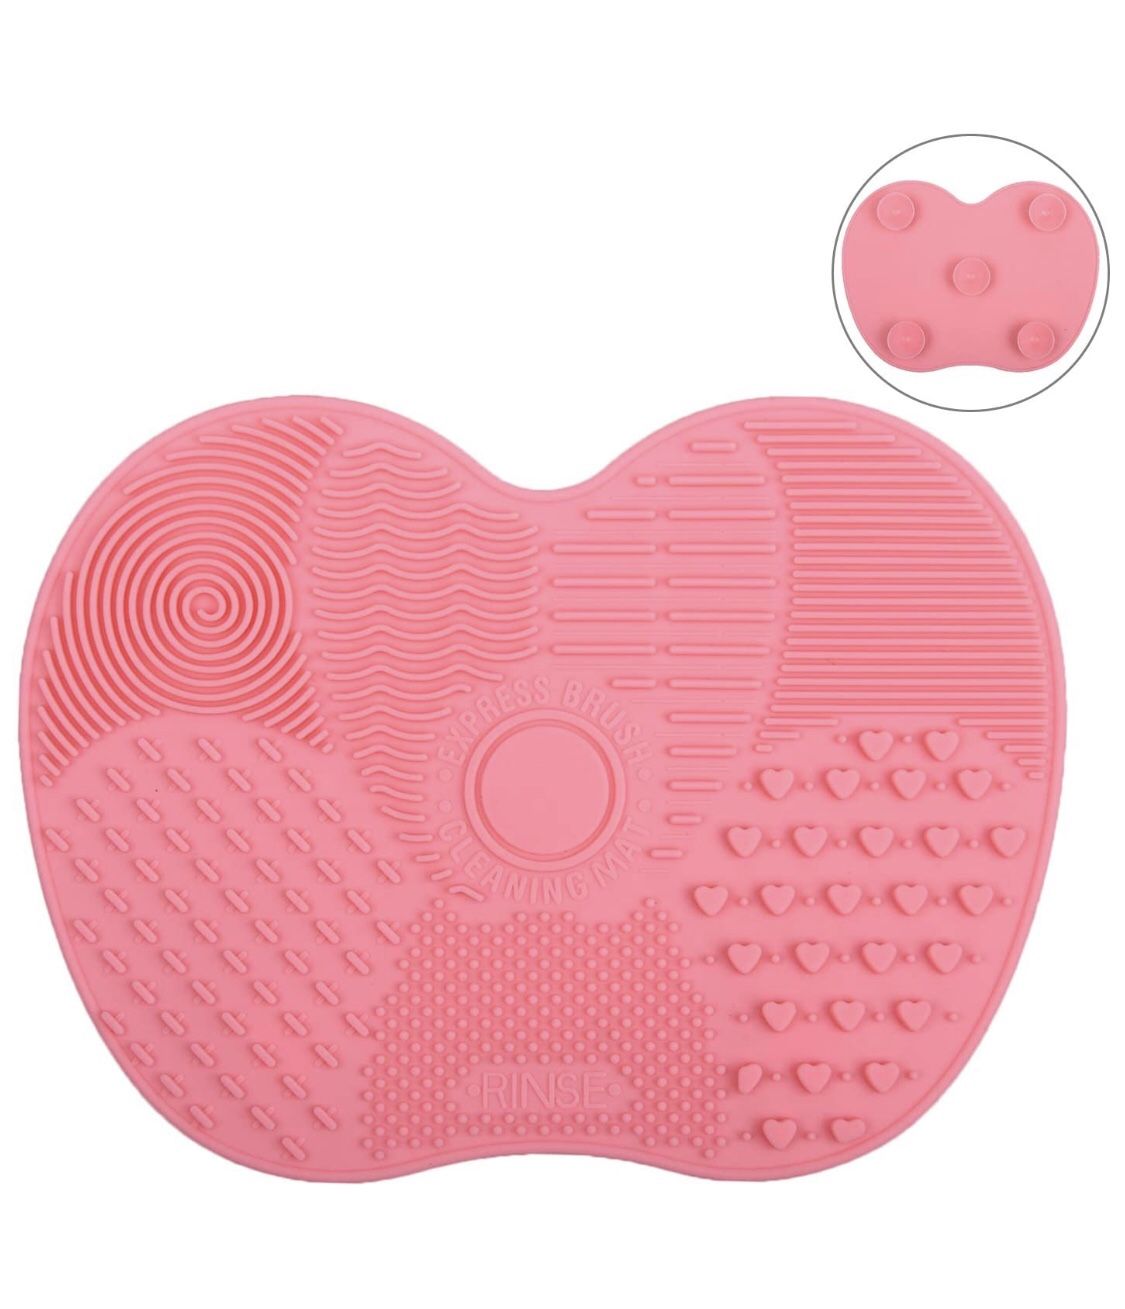 Brand new! (2 PCs) Makeup Brush Cleaning Mat, Silicone, Suction Cup Portable Makeup Brush Cleaning Tool